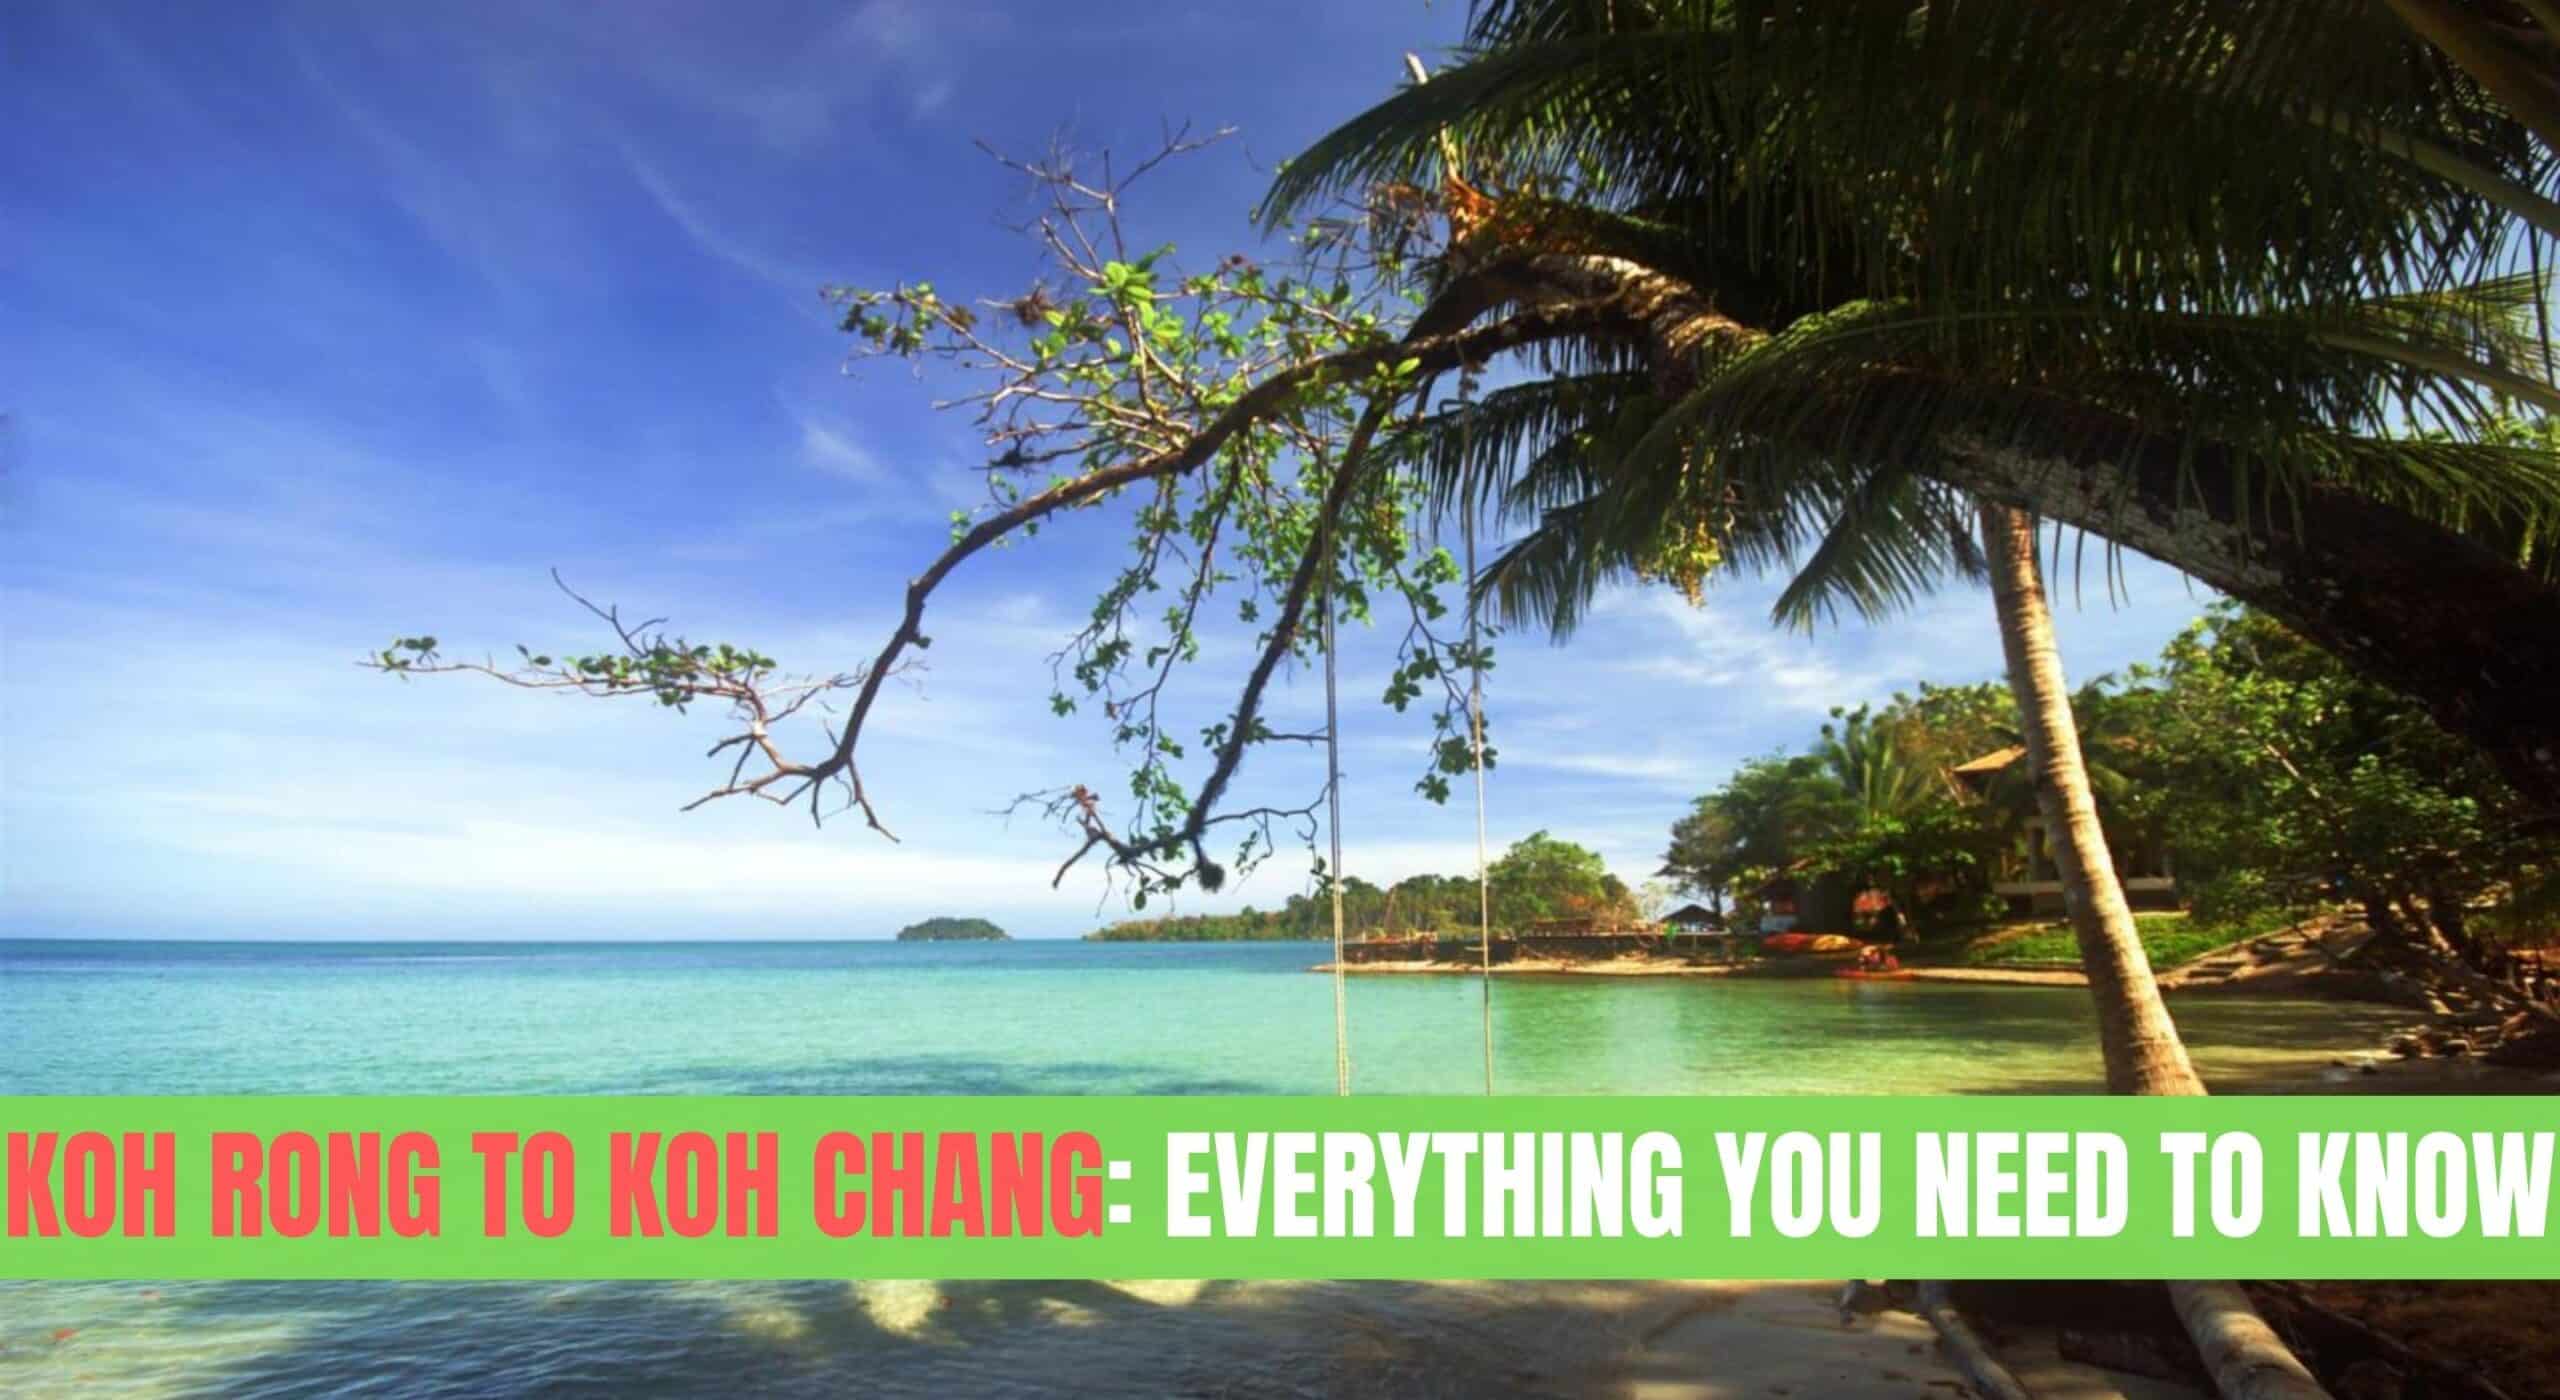 Koh Rong to Koh Chang: Everything You Need To Know